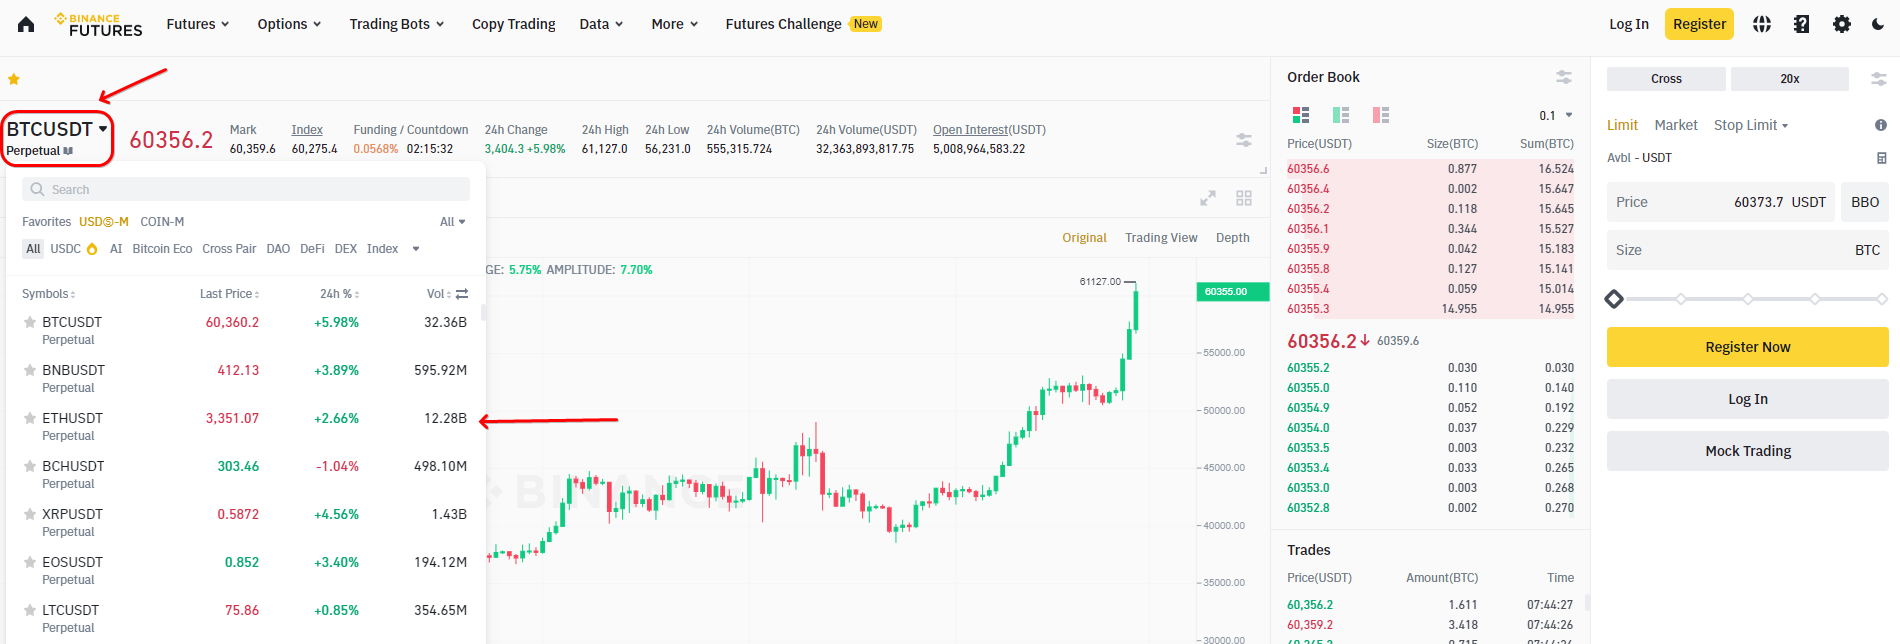 How to scalp Binance futures: Select a trading instrument on the futures page